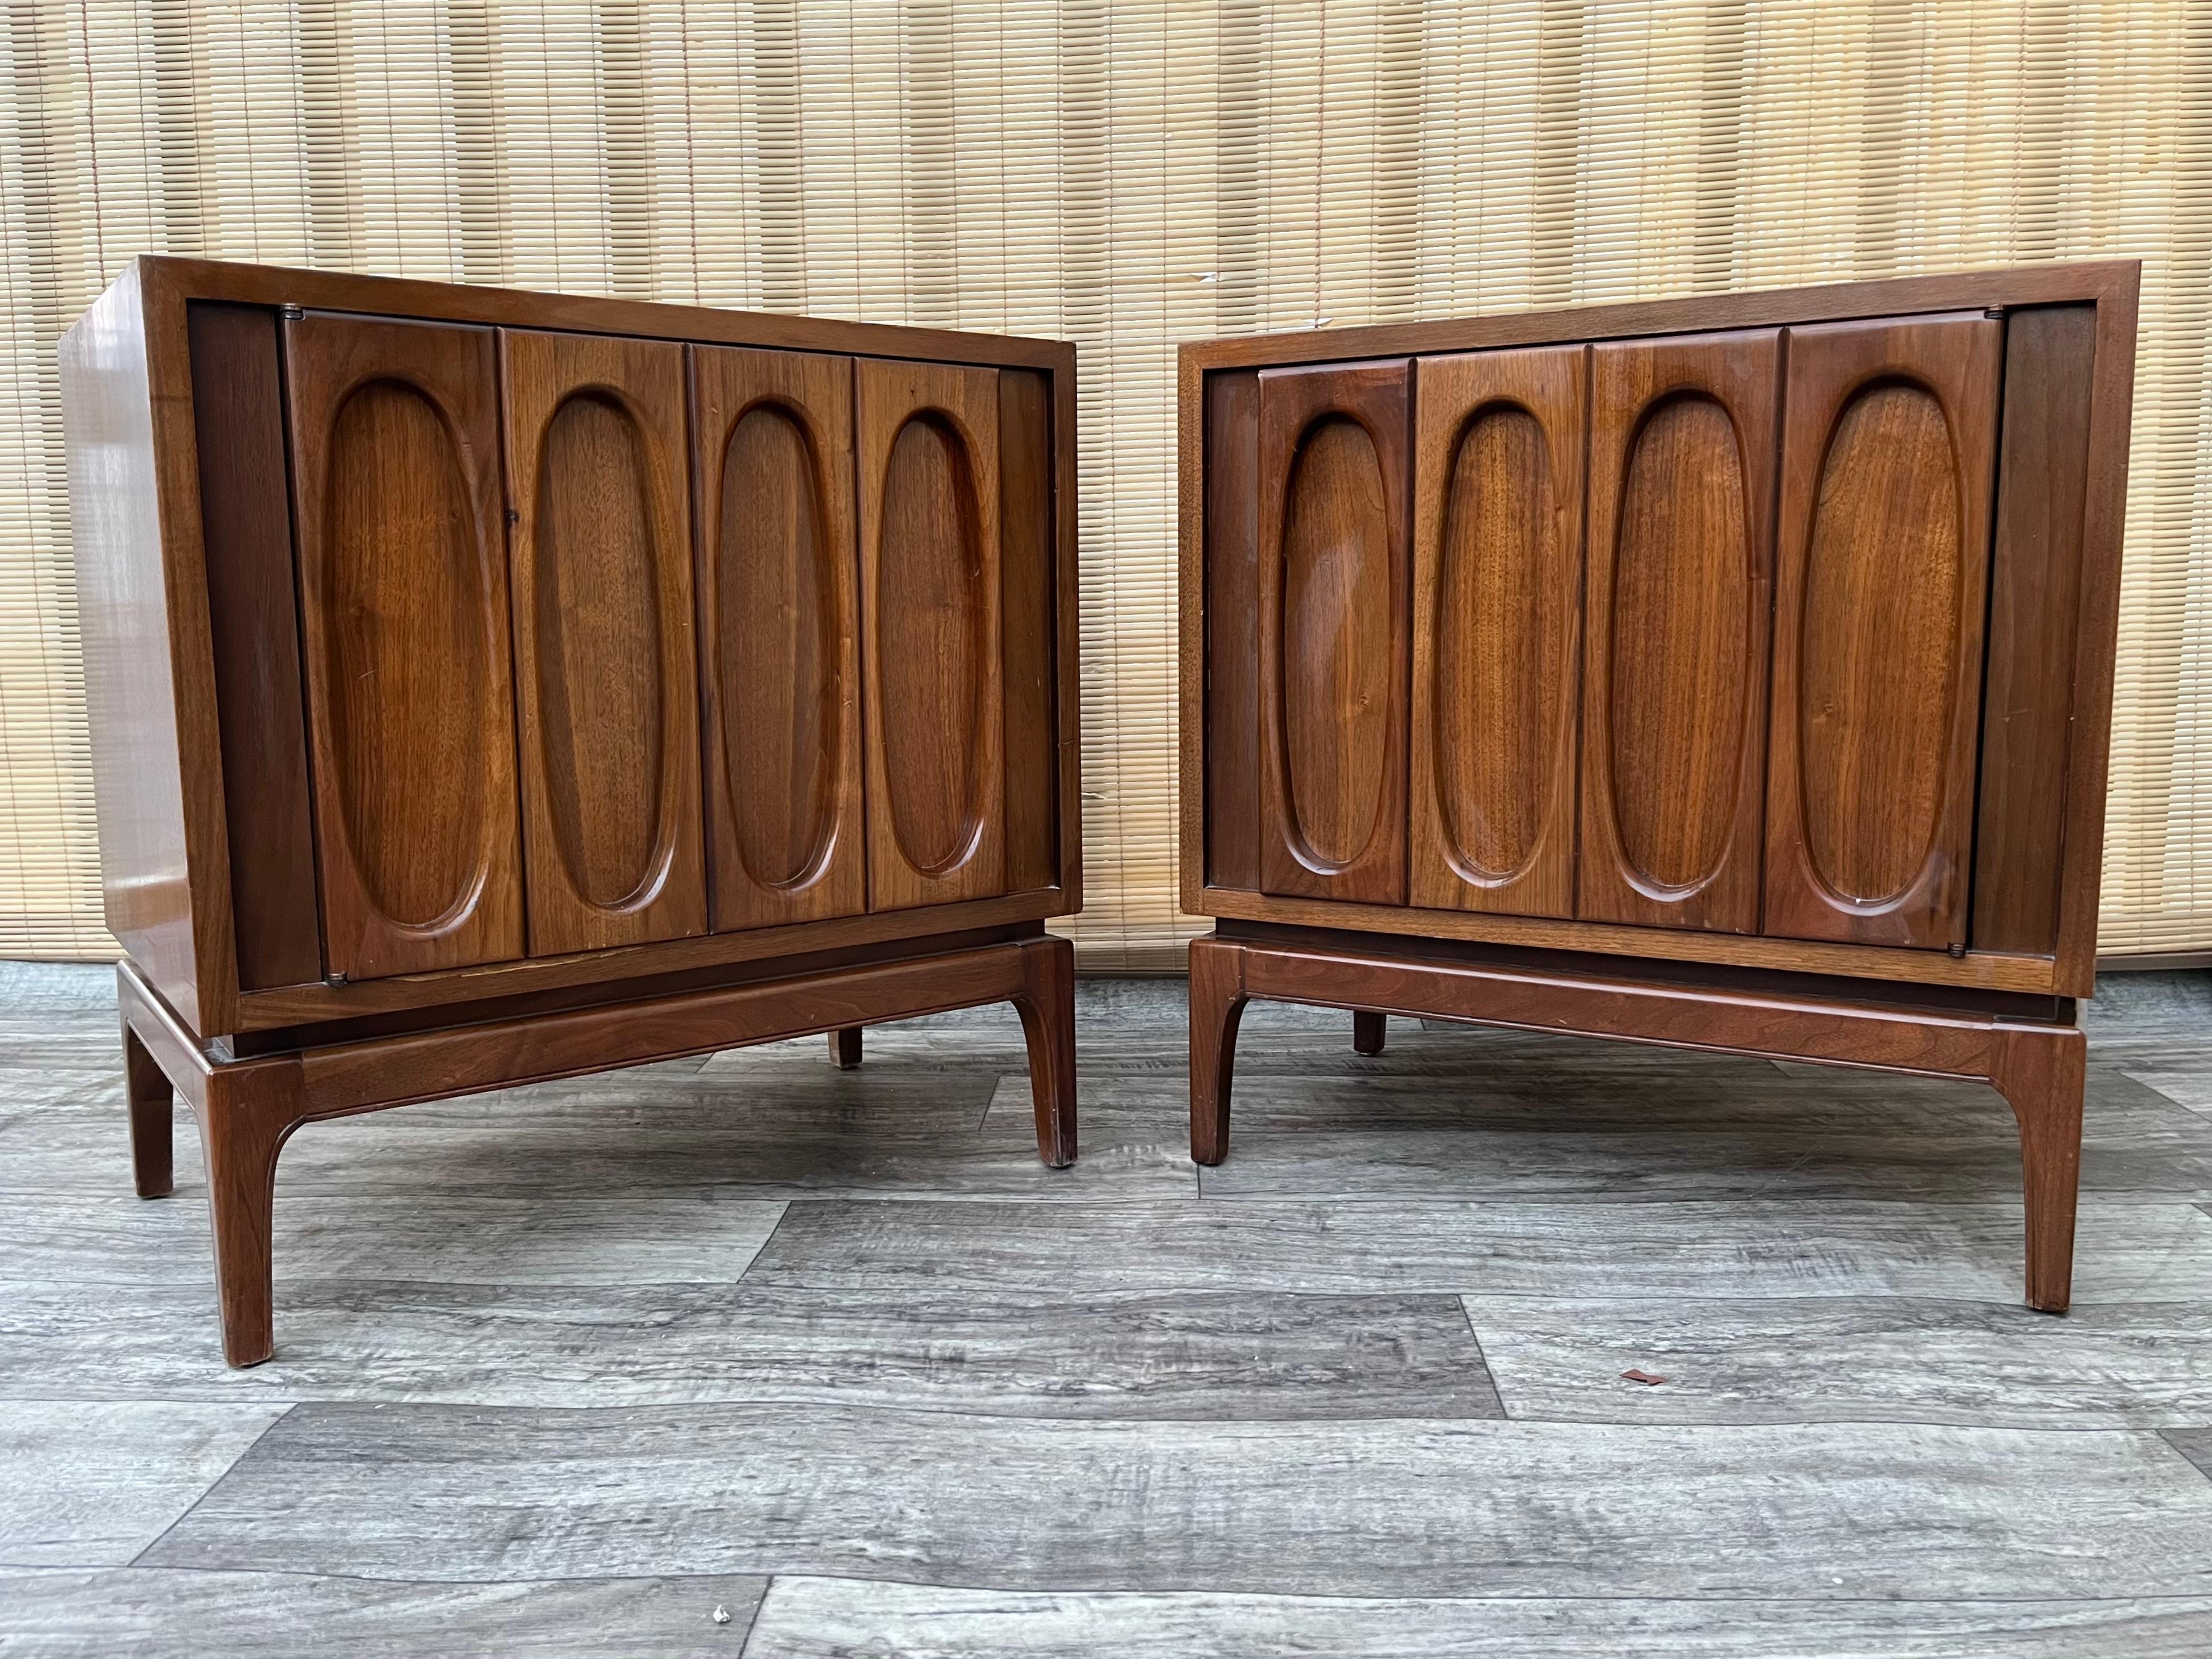 A Pair of Vintage Mid Century Modern Brutalist Inspired Nightstands. Circa 1960s.
Feature a brutalist inspired designed doors, a beautiful walnut wood grain finish, and open cabinet spaces with removable shelves.
In good original condition with